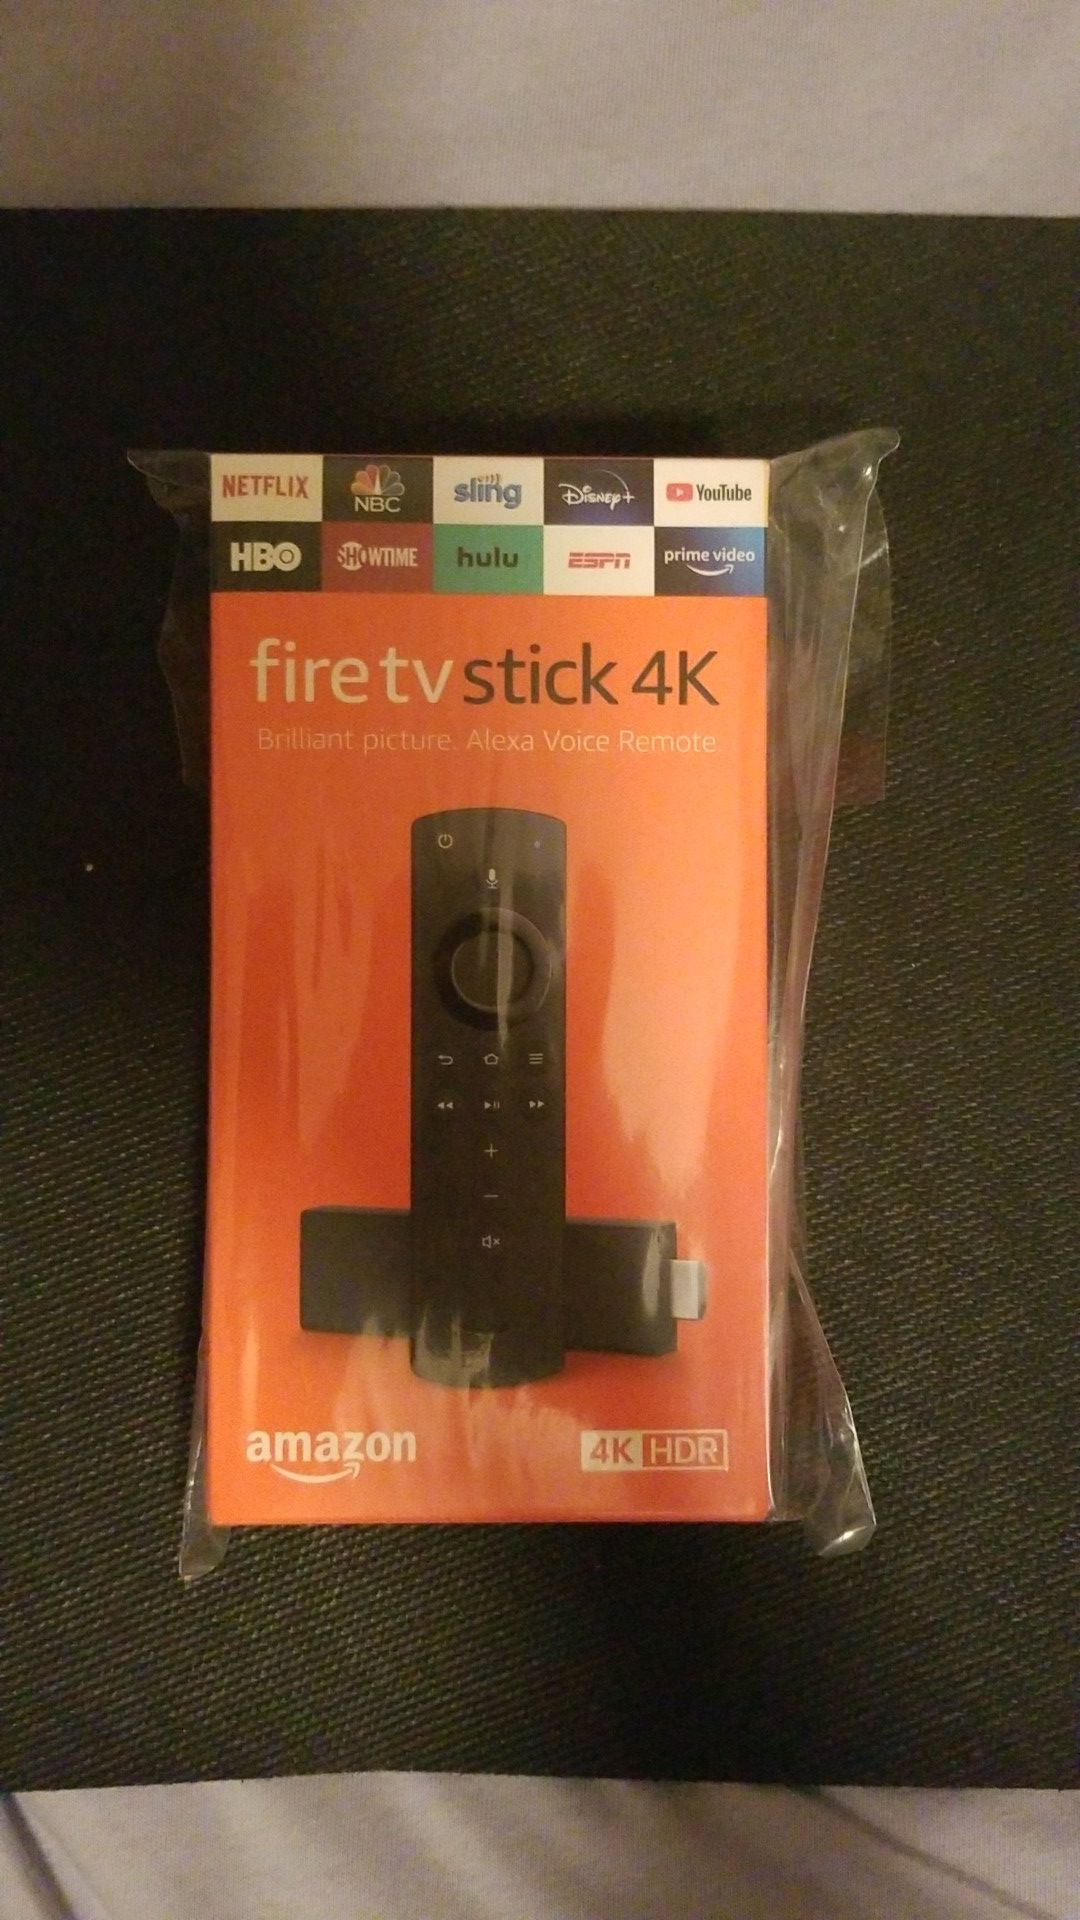 FireTV Stick 4K Streaming device with Alexa built in, Dolby Vision, includes Alexa Voice Remote, latest release